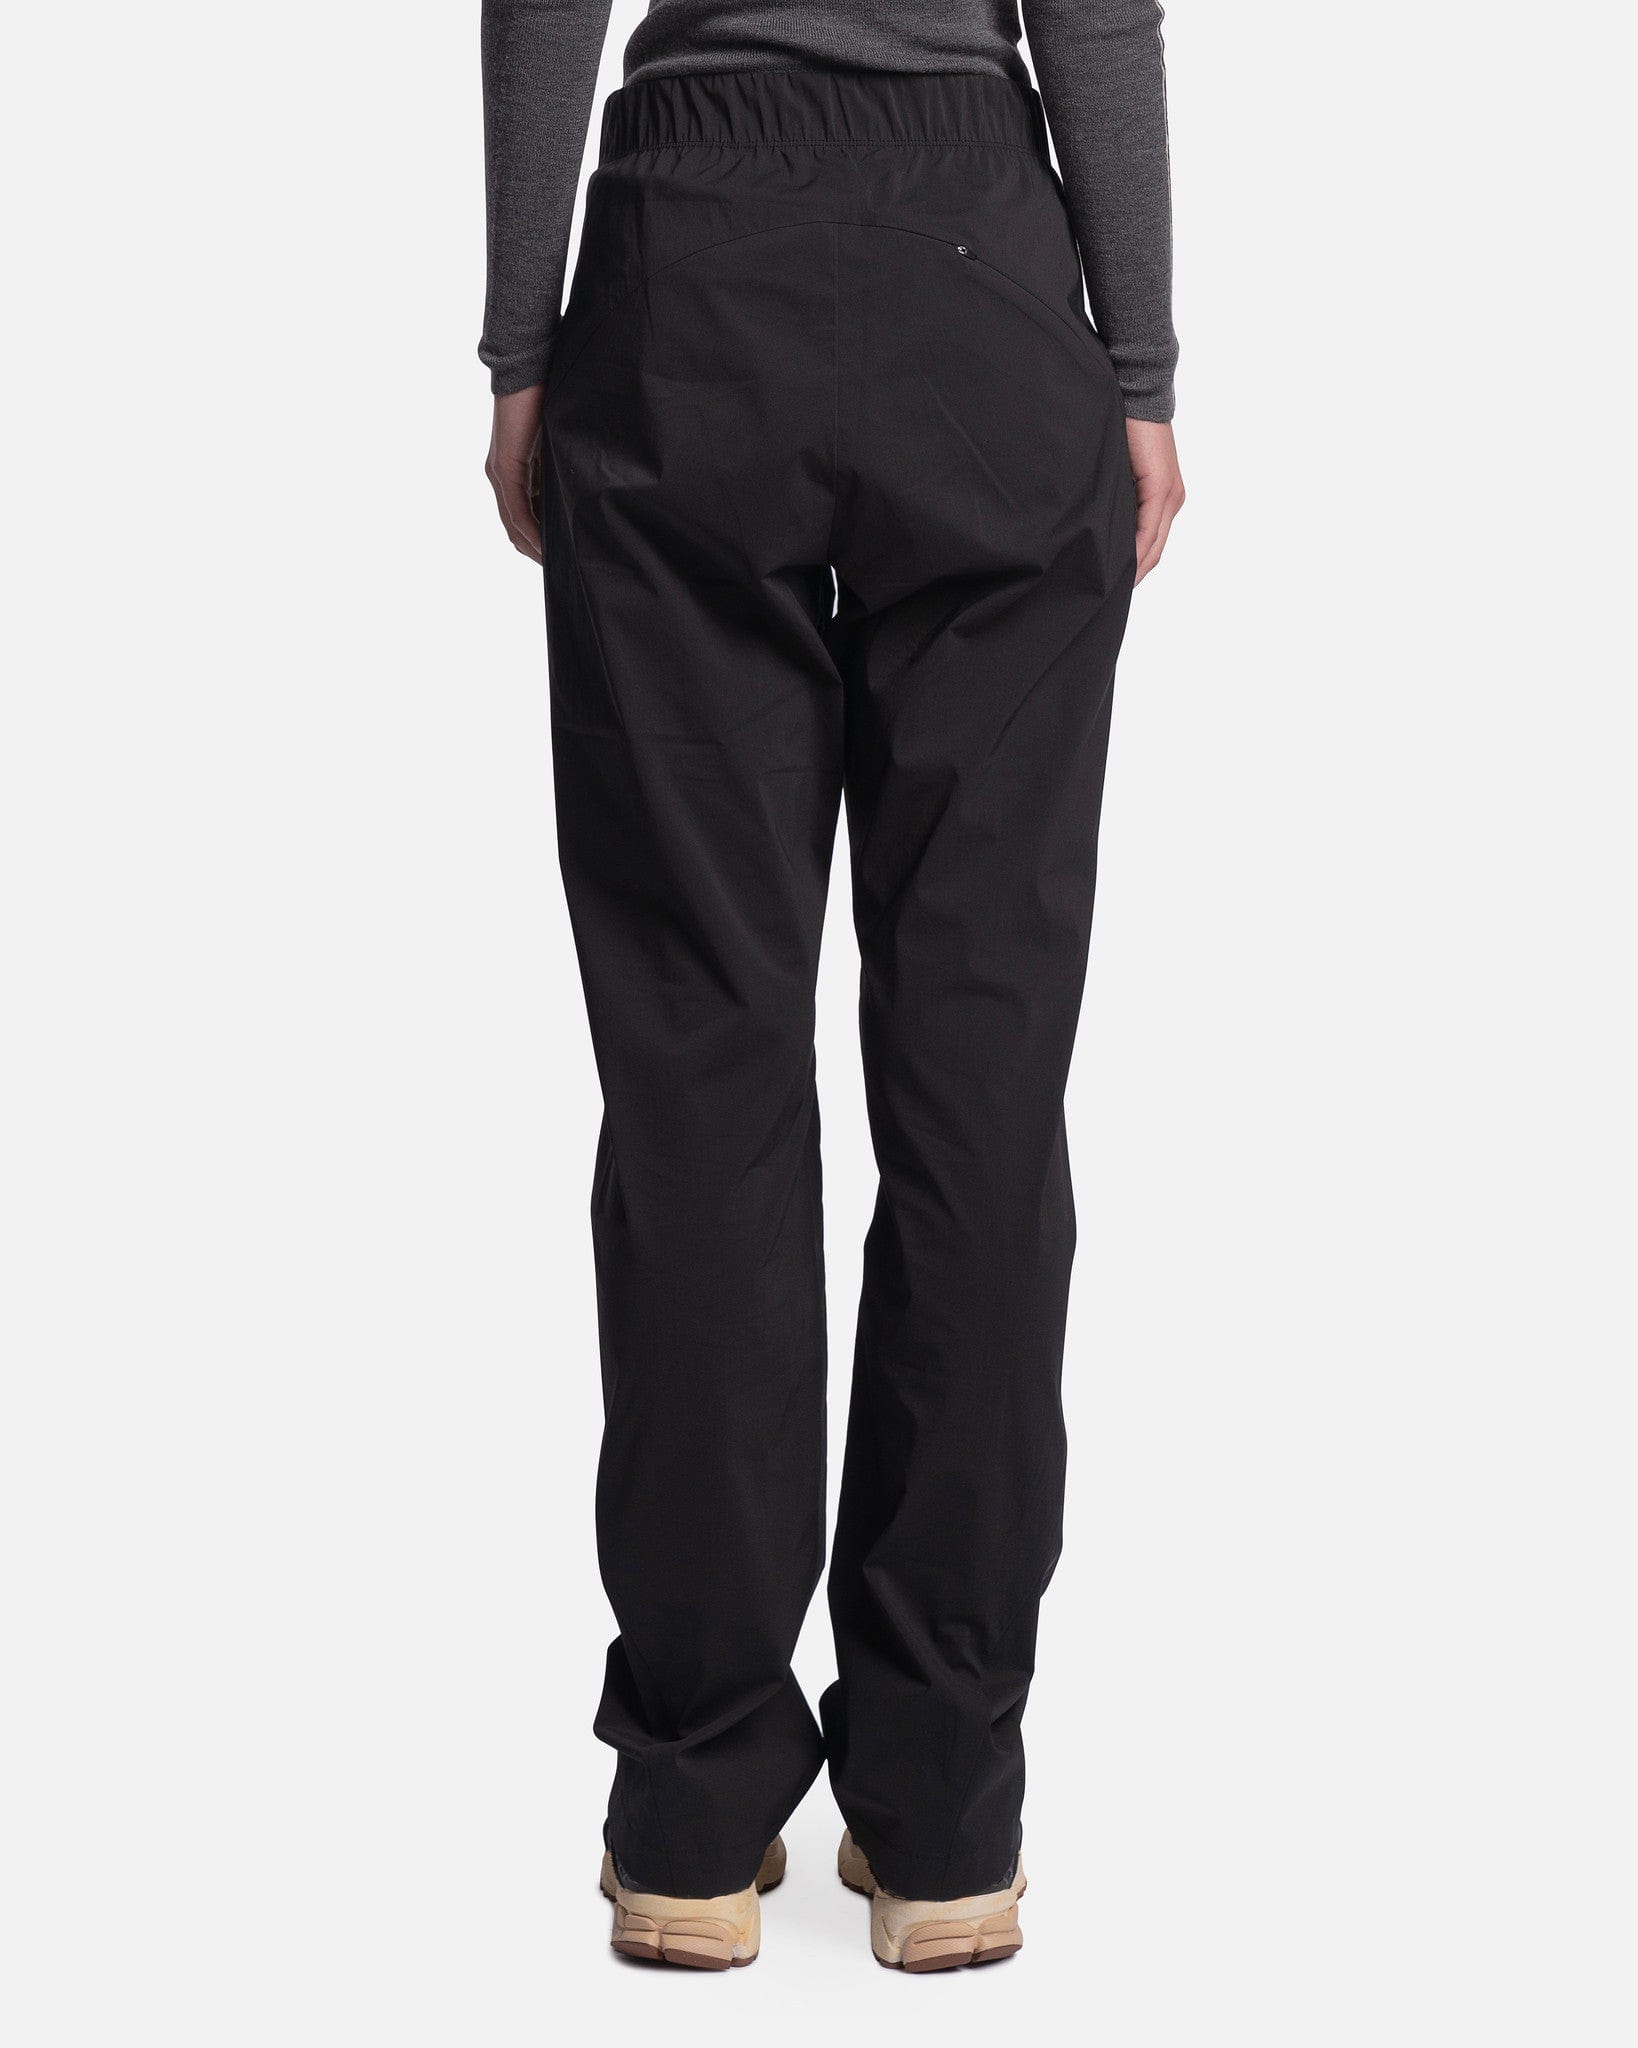 POST ARCHIVE FACTION (P.A.F) women's pants Women's 5.0+ Technical Pants Right in Black